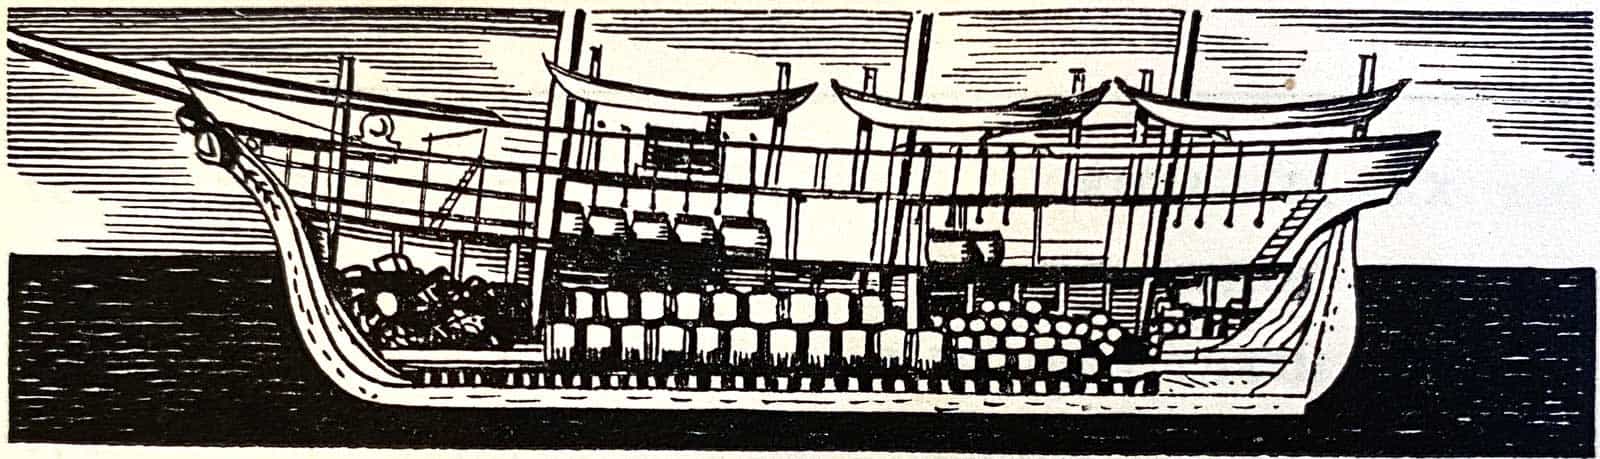 Illustration of a side view deck plan of the Bounty